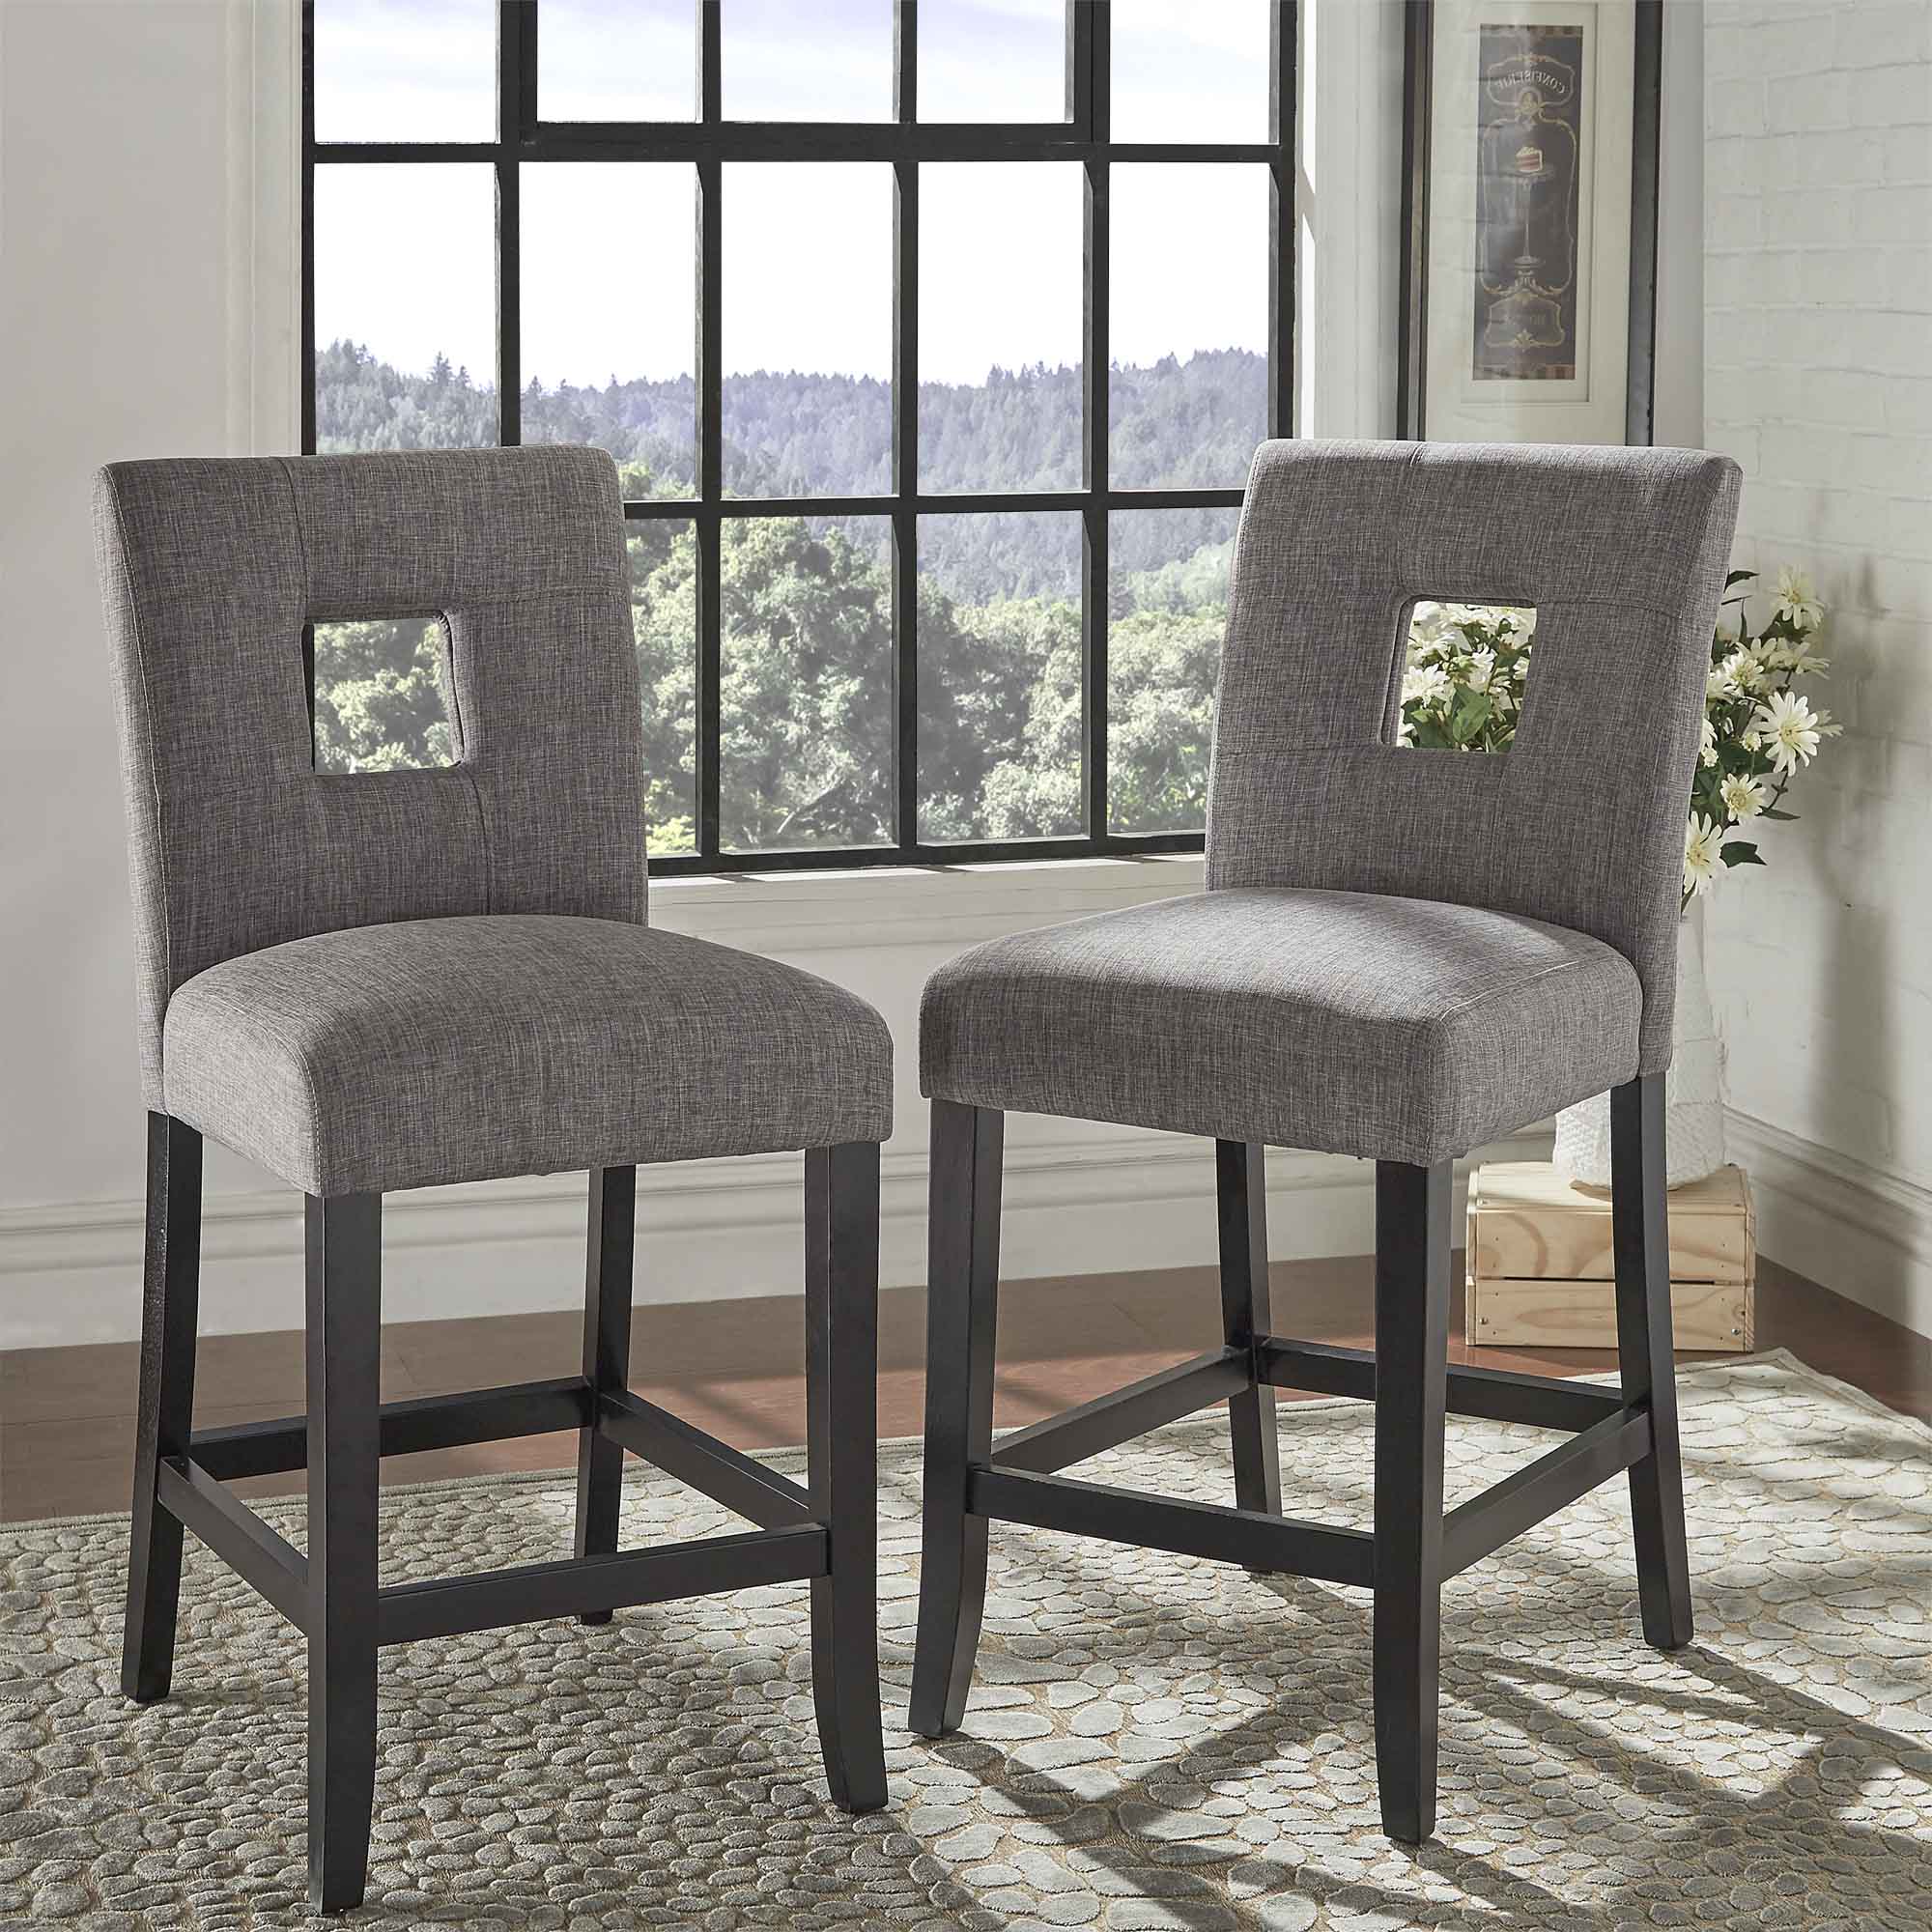 Keyhole Counter Height High Back Stools (Set of 2)